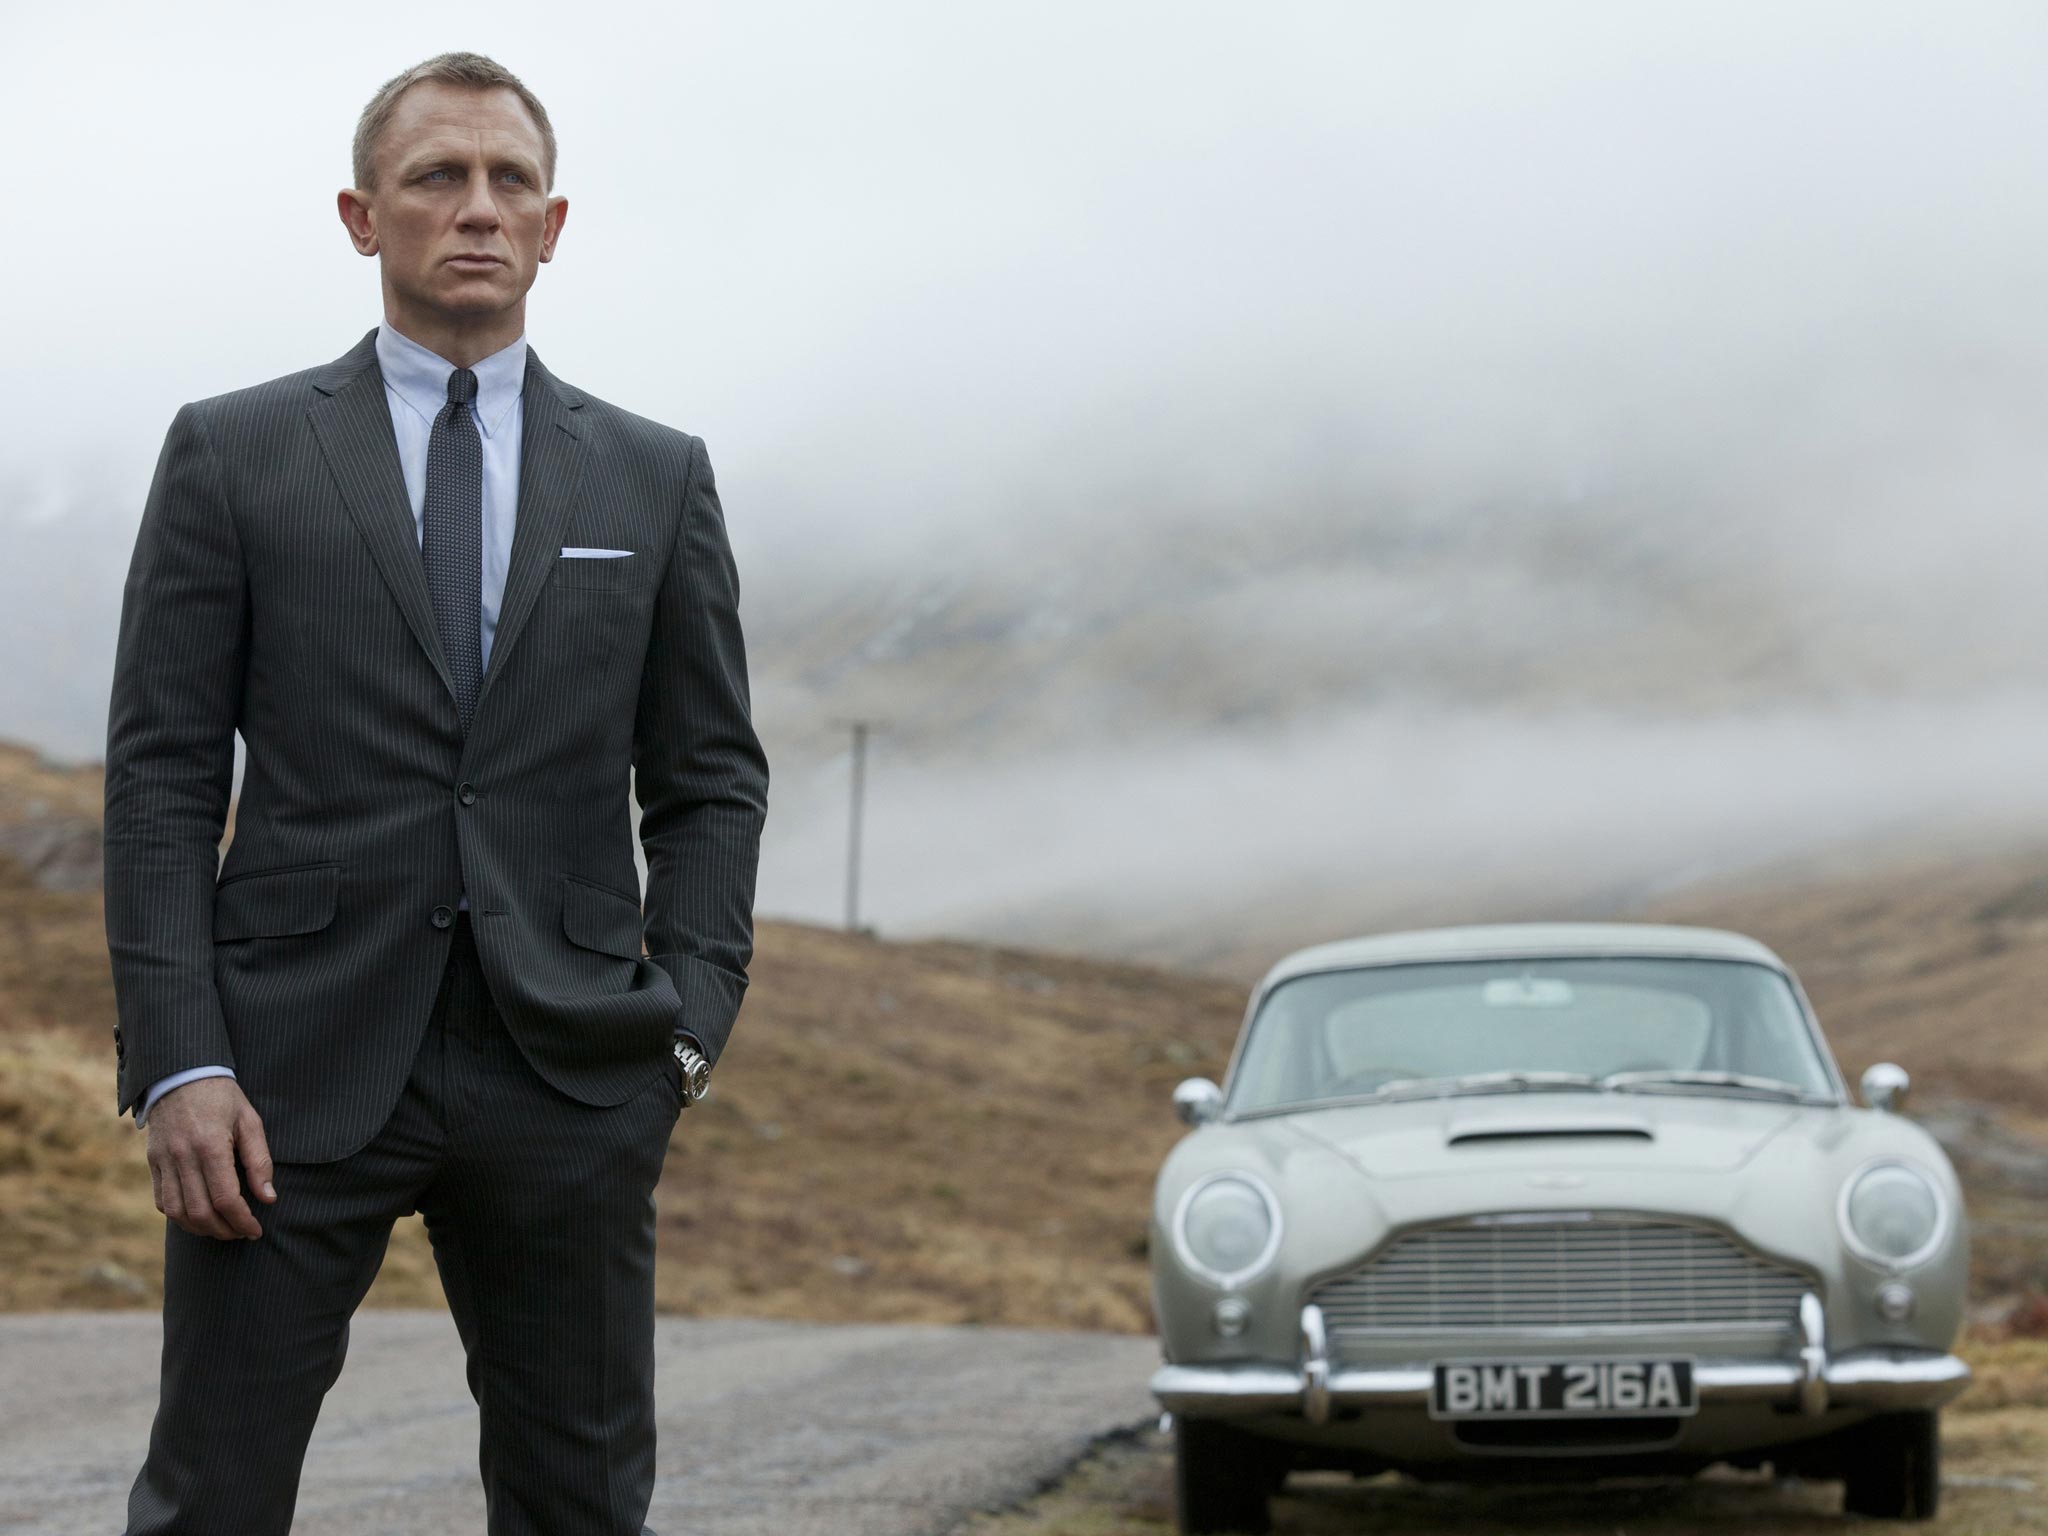 While many films were released, few managed to match the success of James Bond blockbuster 'Skyfall'